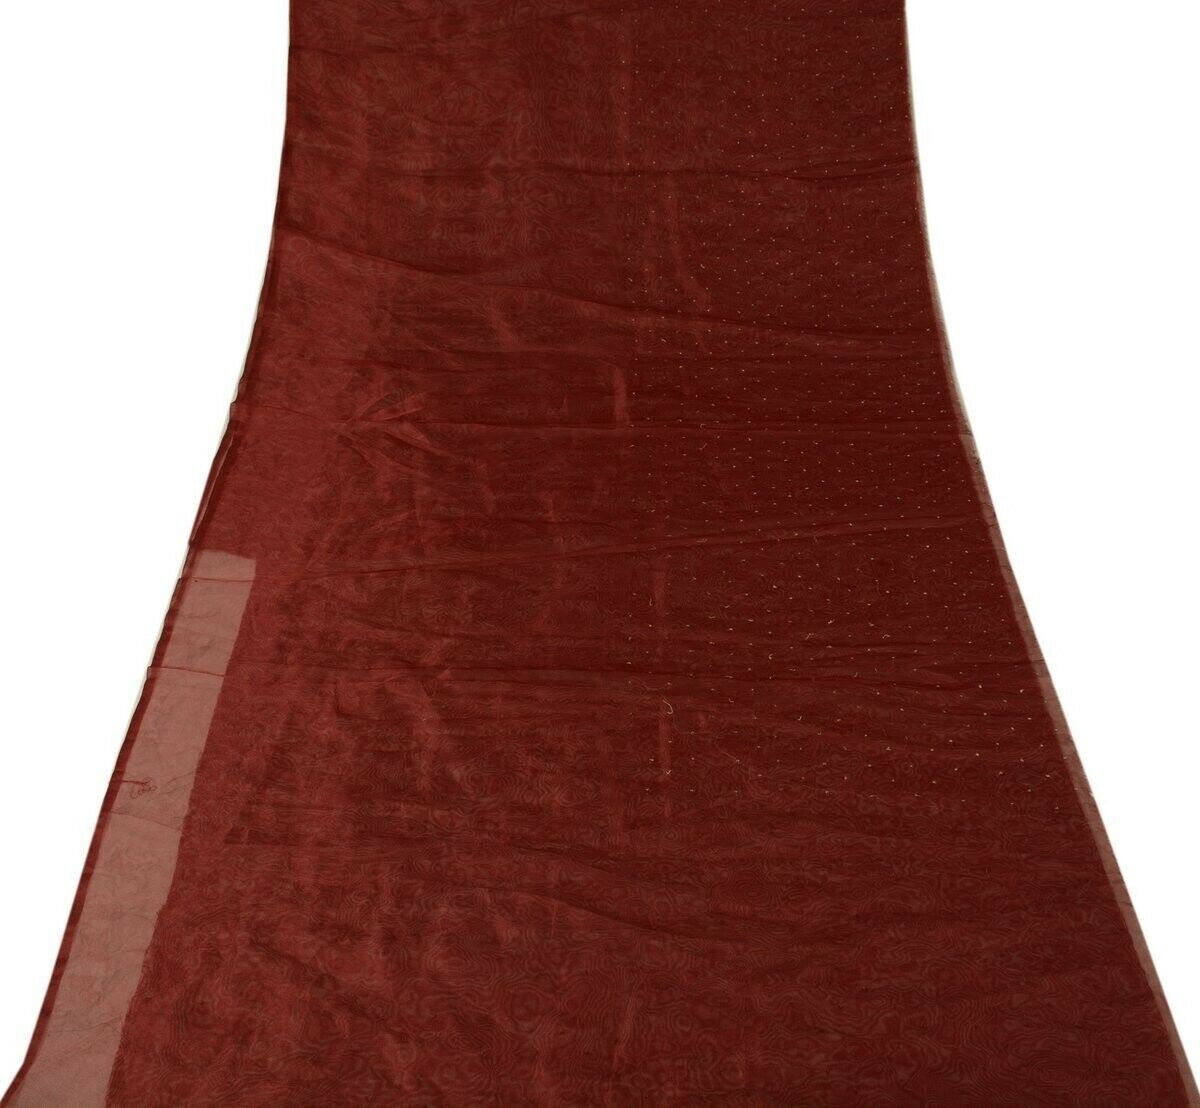 Vintage Sari Remnant Scrap NET Fabric for Sewing Craft Maroon